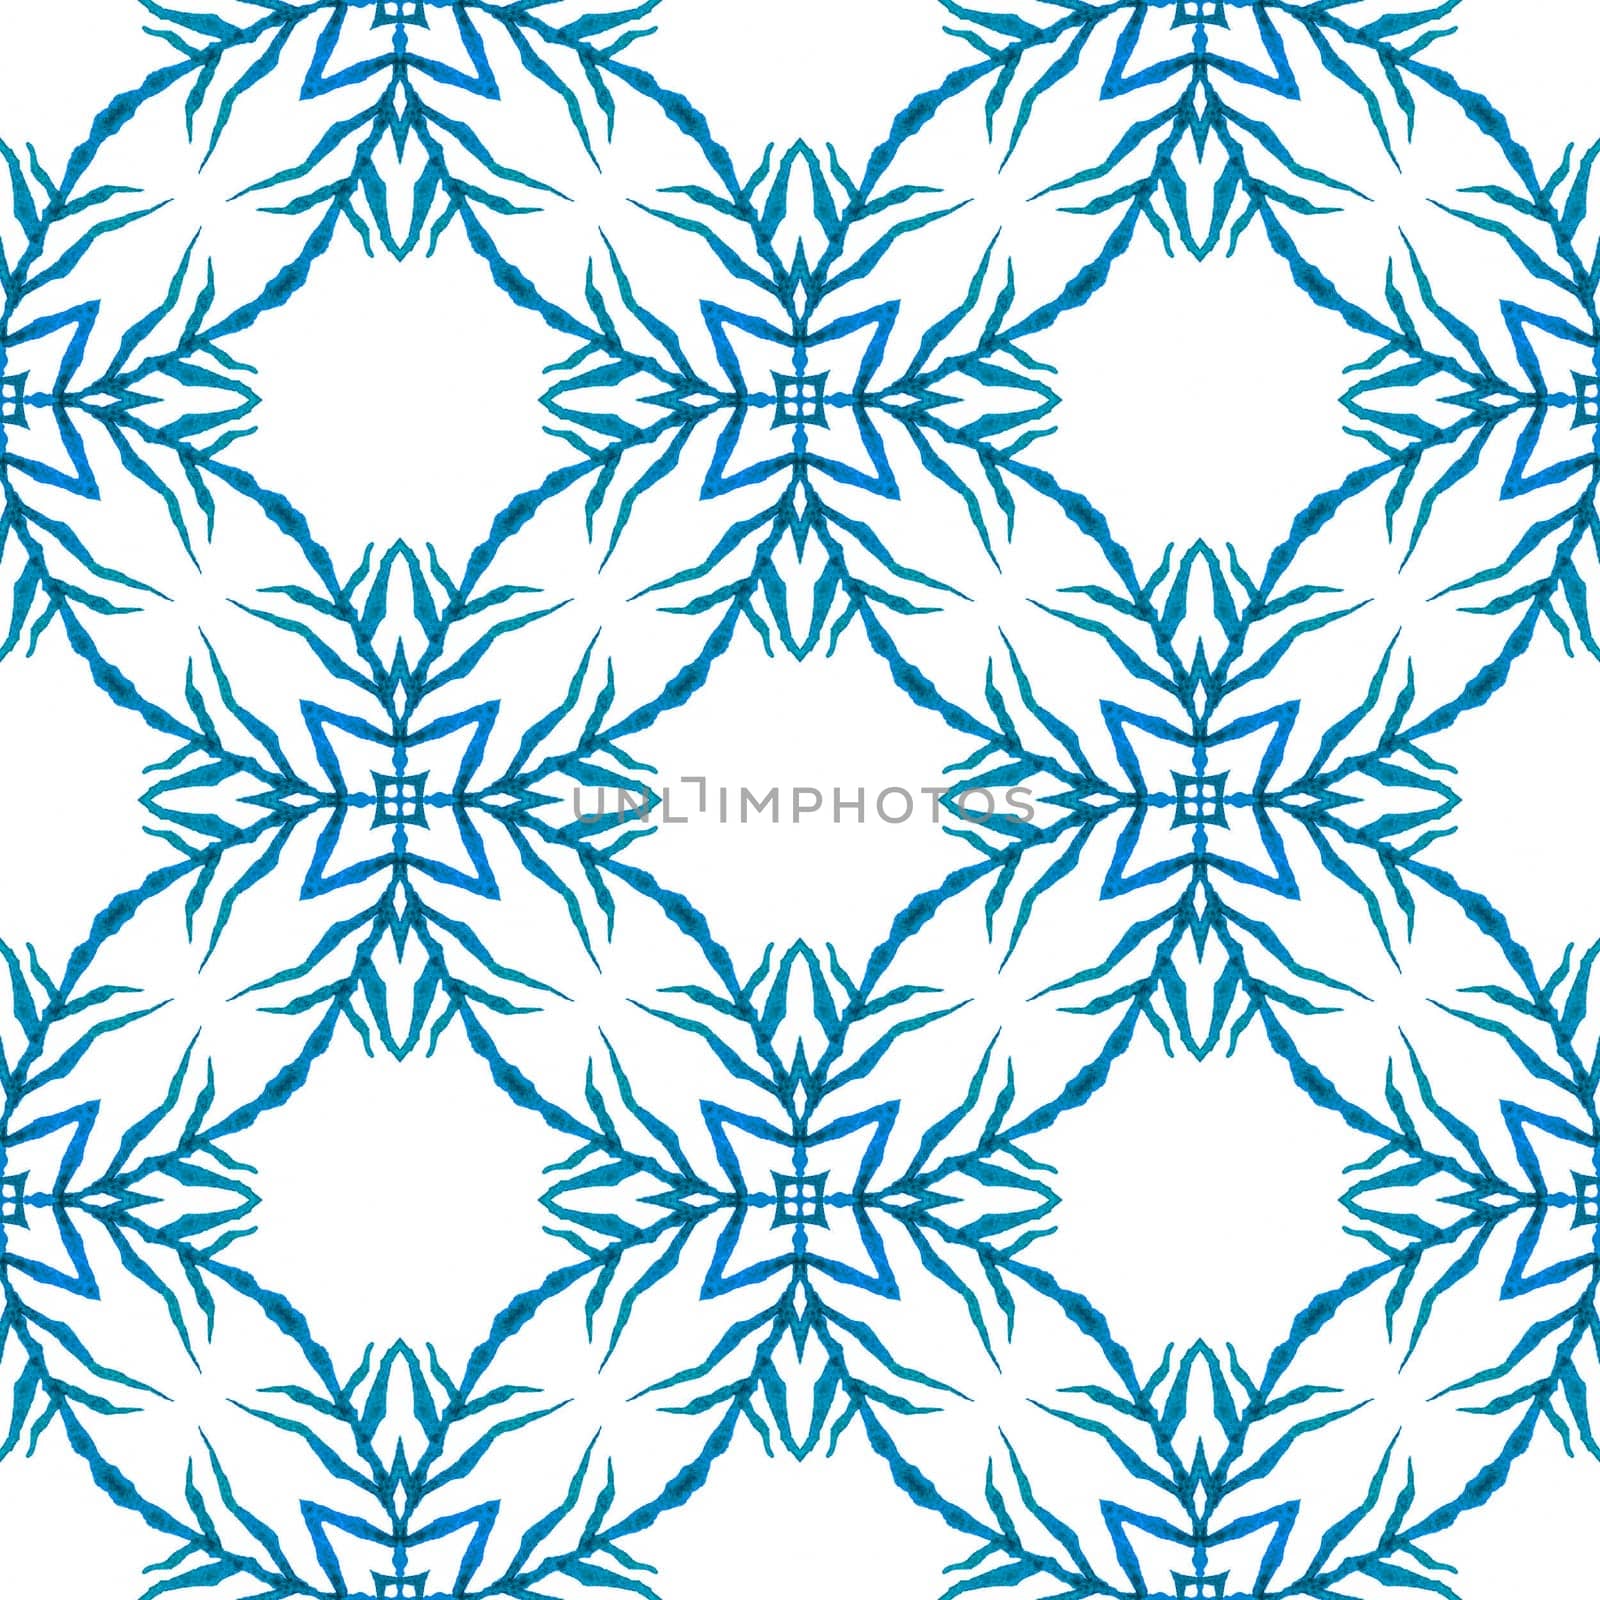 Exotic seamless pattern. Blue ideal boho chic summer design. Summer exotic seamless border. Textile ready unequaled print, swimwear fabric, wallpaper, wrapping.